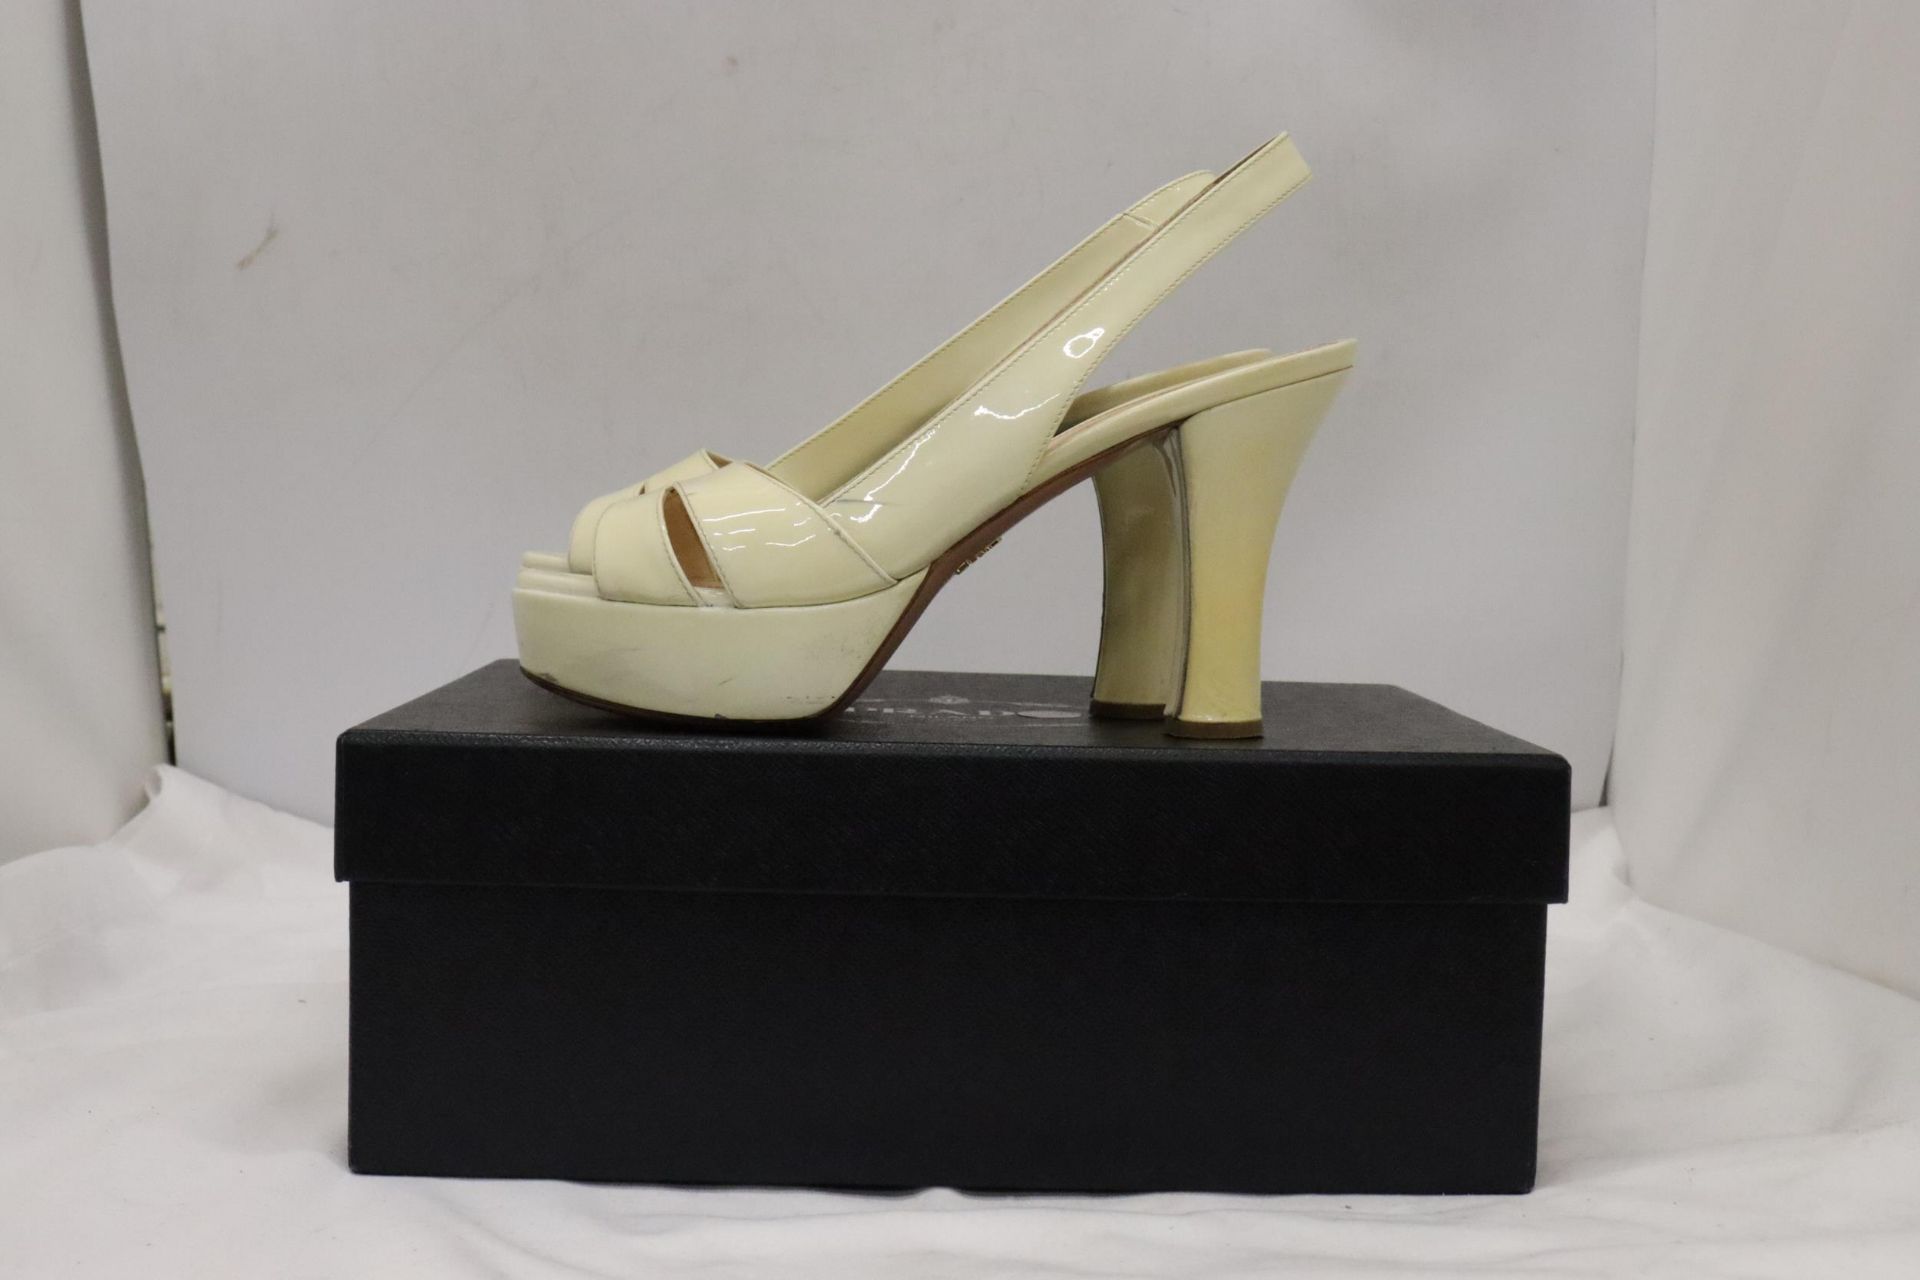 A PAIR OF CREAM HIGH HEELED SHOES, MARKED WITH A GOLD COLOURED 'PRADA' TO THE UNDERSIDE, IN A BOX - Image 7 of 7